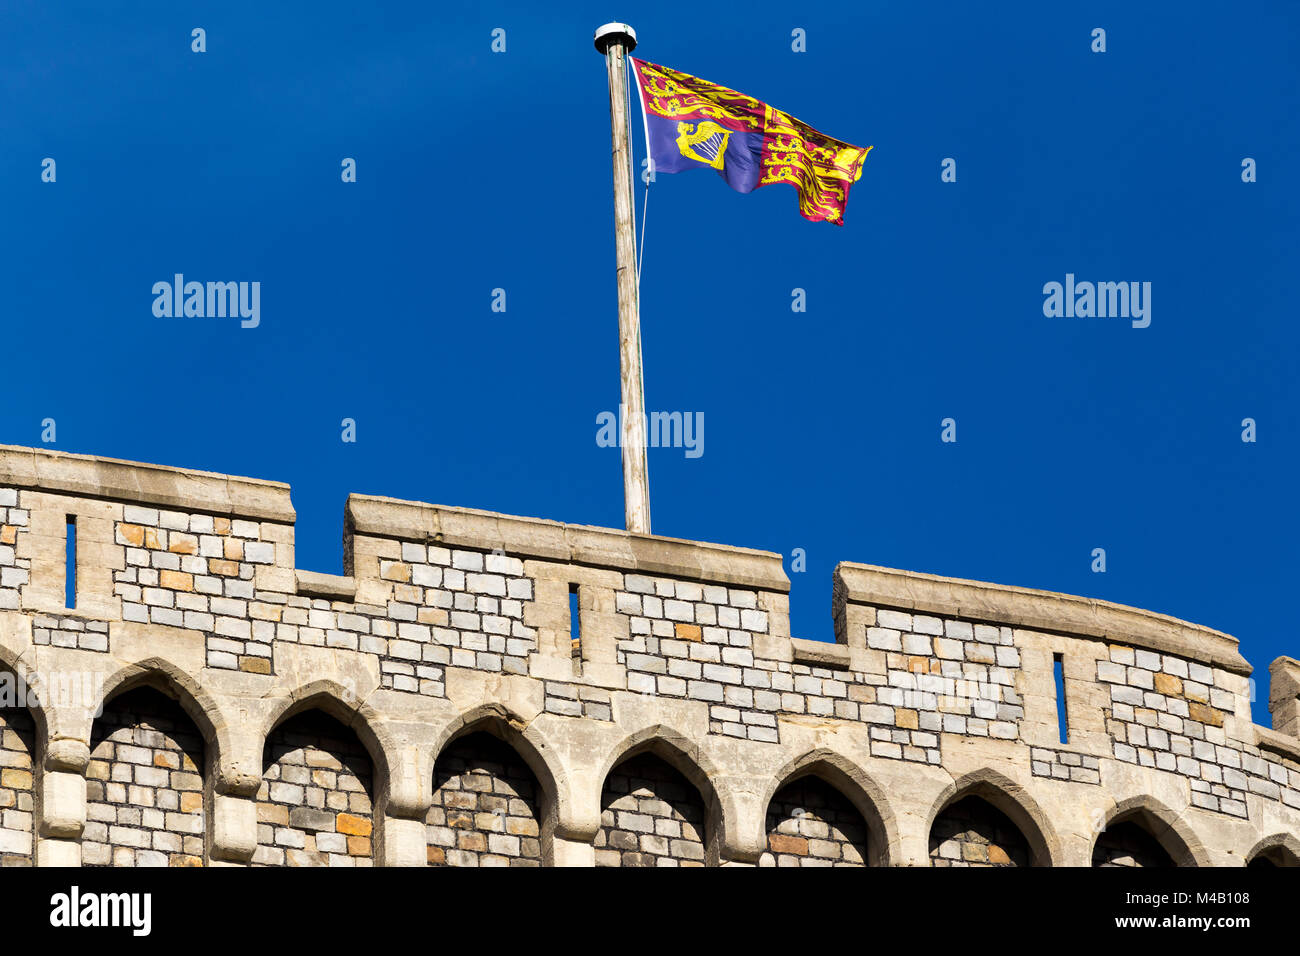 The Royal Standard flag flying on / from a flagpole / pole at Windsor Castle, UK. It is flown at royal residences only when the sovereign is present. Stock Photo